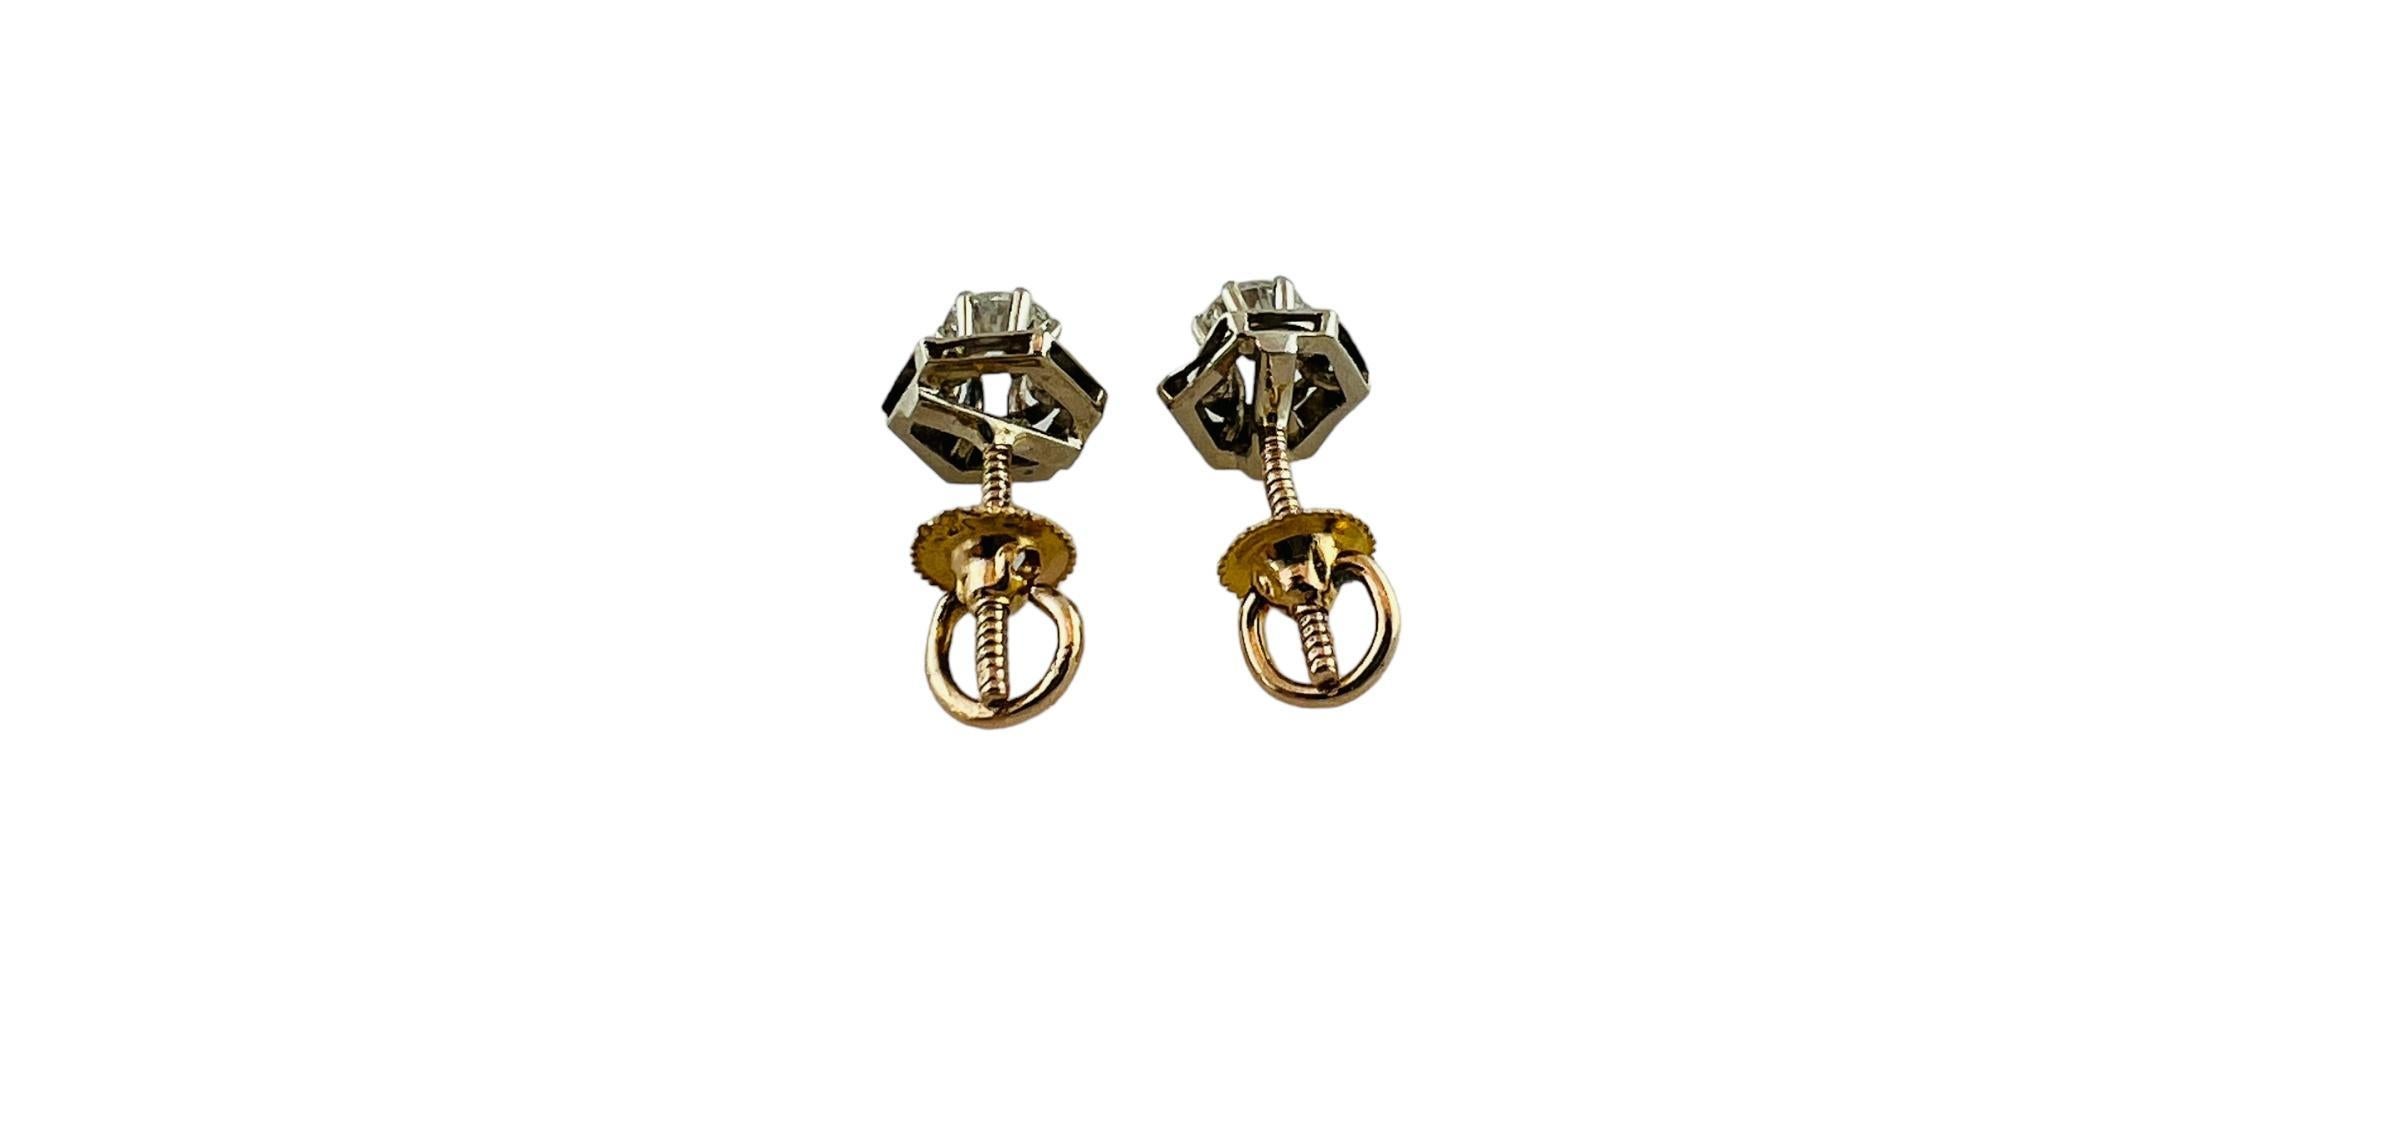 14K White Gold Diamond Stud Earrings with Hexagon Jacket #15994 In Good Condition For Sale In Washington Depot, CT